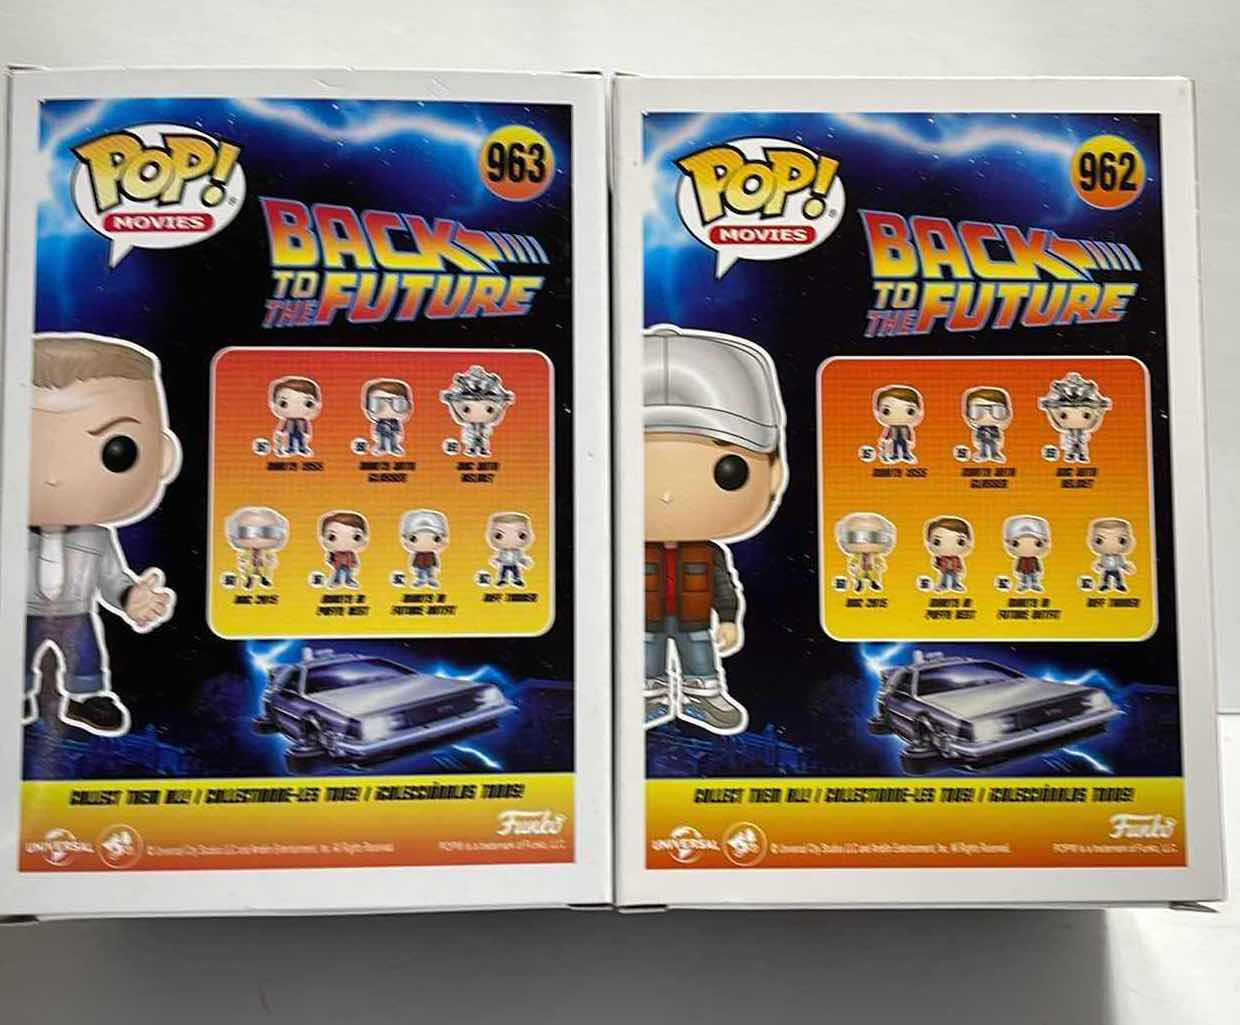 Photo 2 of NIB FUNKO POP MOVIES SERIES BACK TO THE FUTURE “MARTY IN FUTURE OUTFIT” & “BIFF TANNEN” -TOTAL RETAIL PRICE $29.99